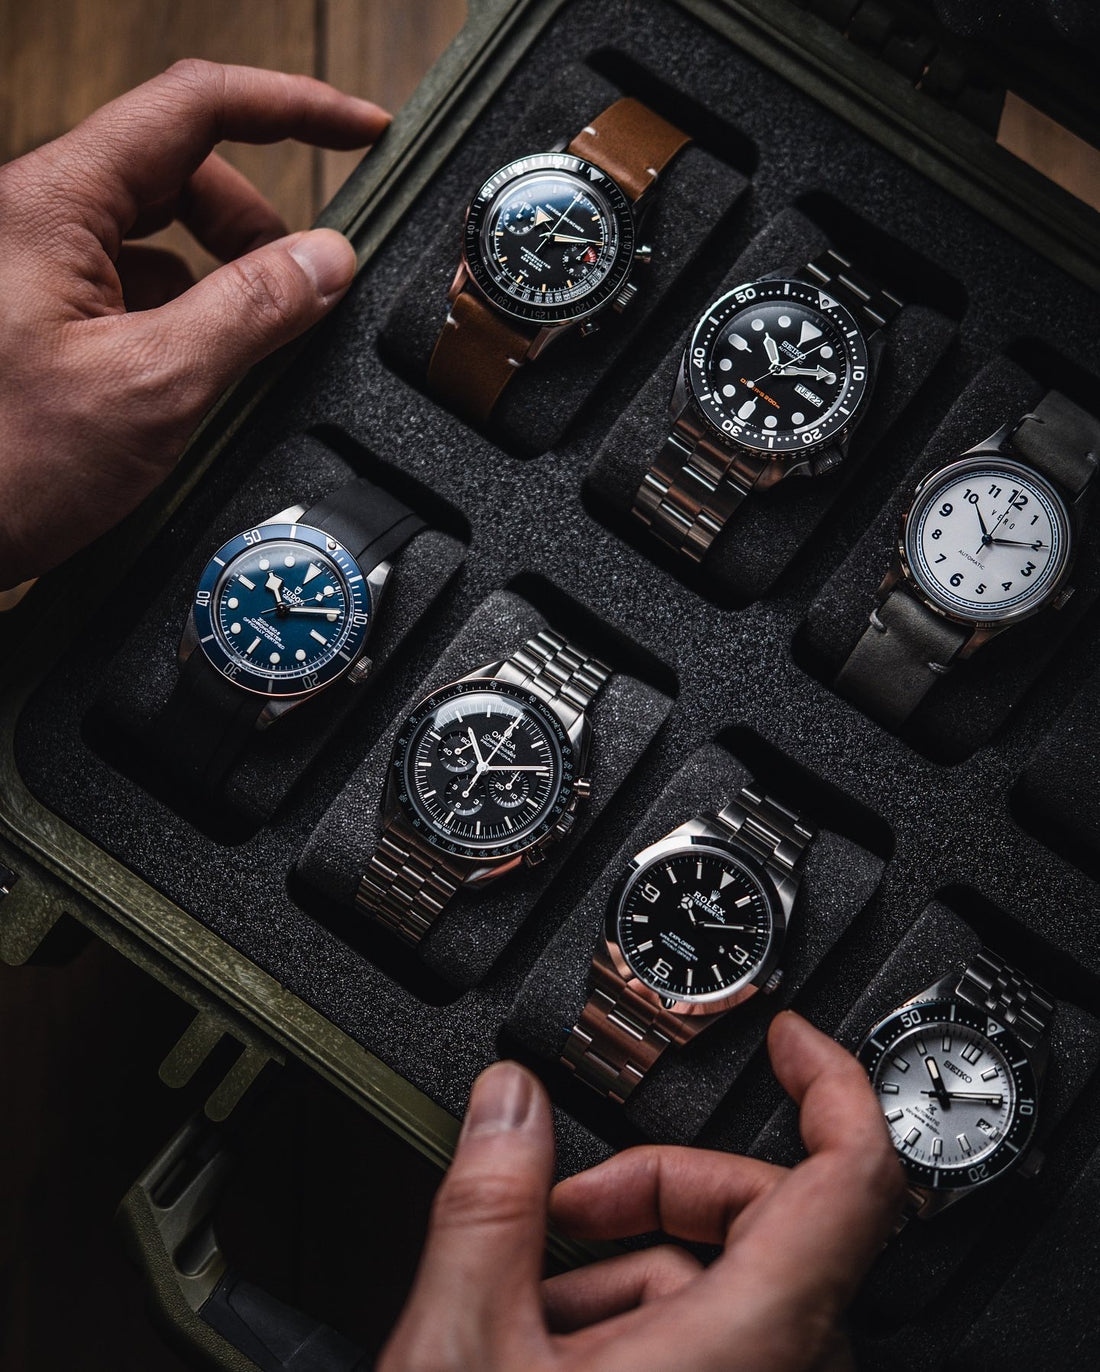 Watch Collecting Guide: A look inside Eric of Average Watches’ collection.